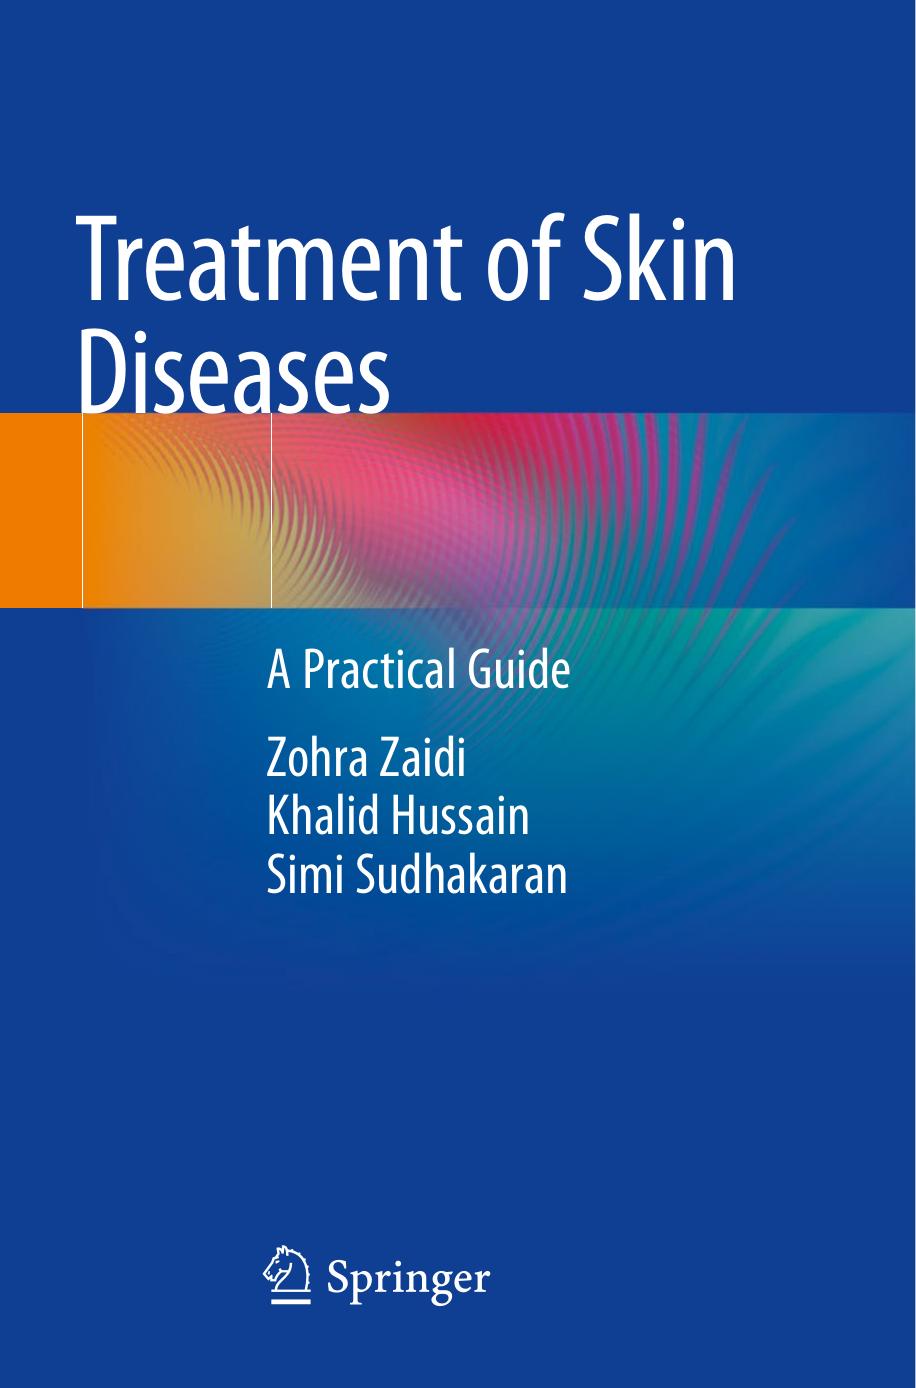 Treatment of Skin Diseases  A Practical Guide 2019